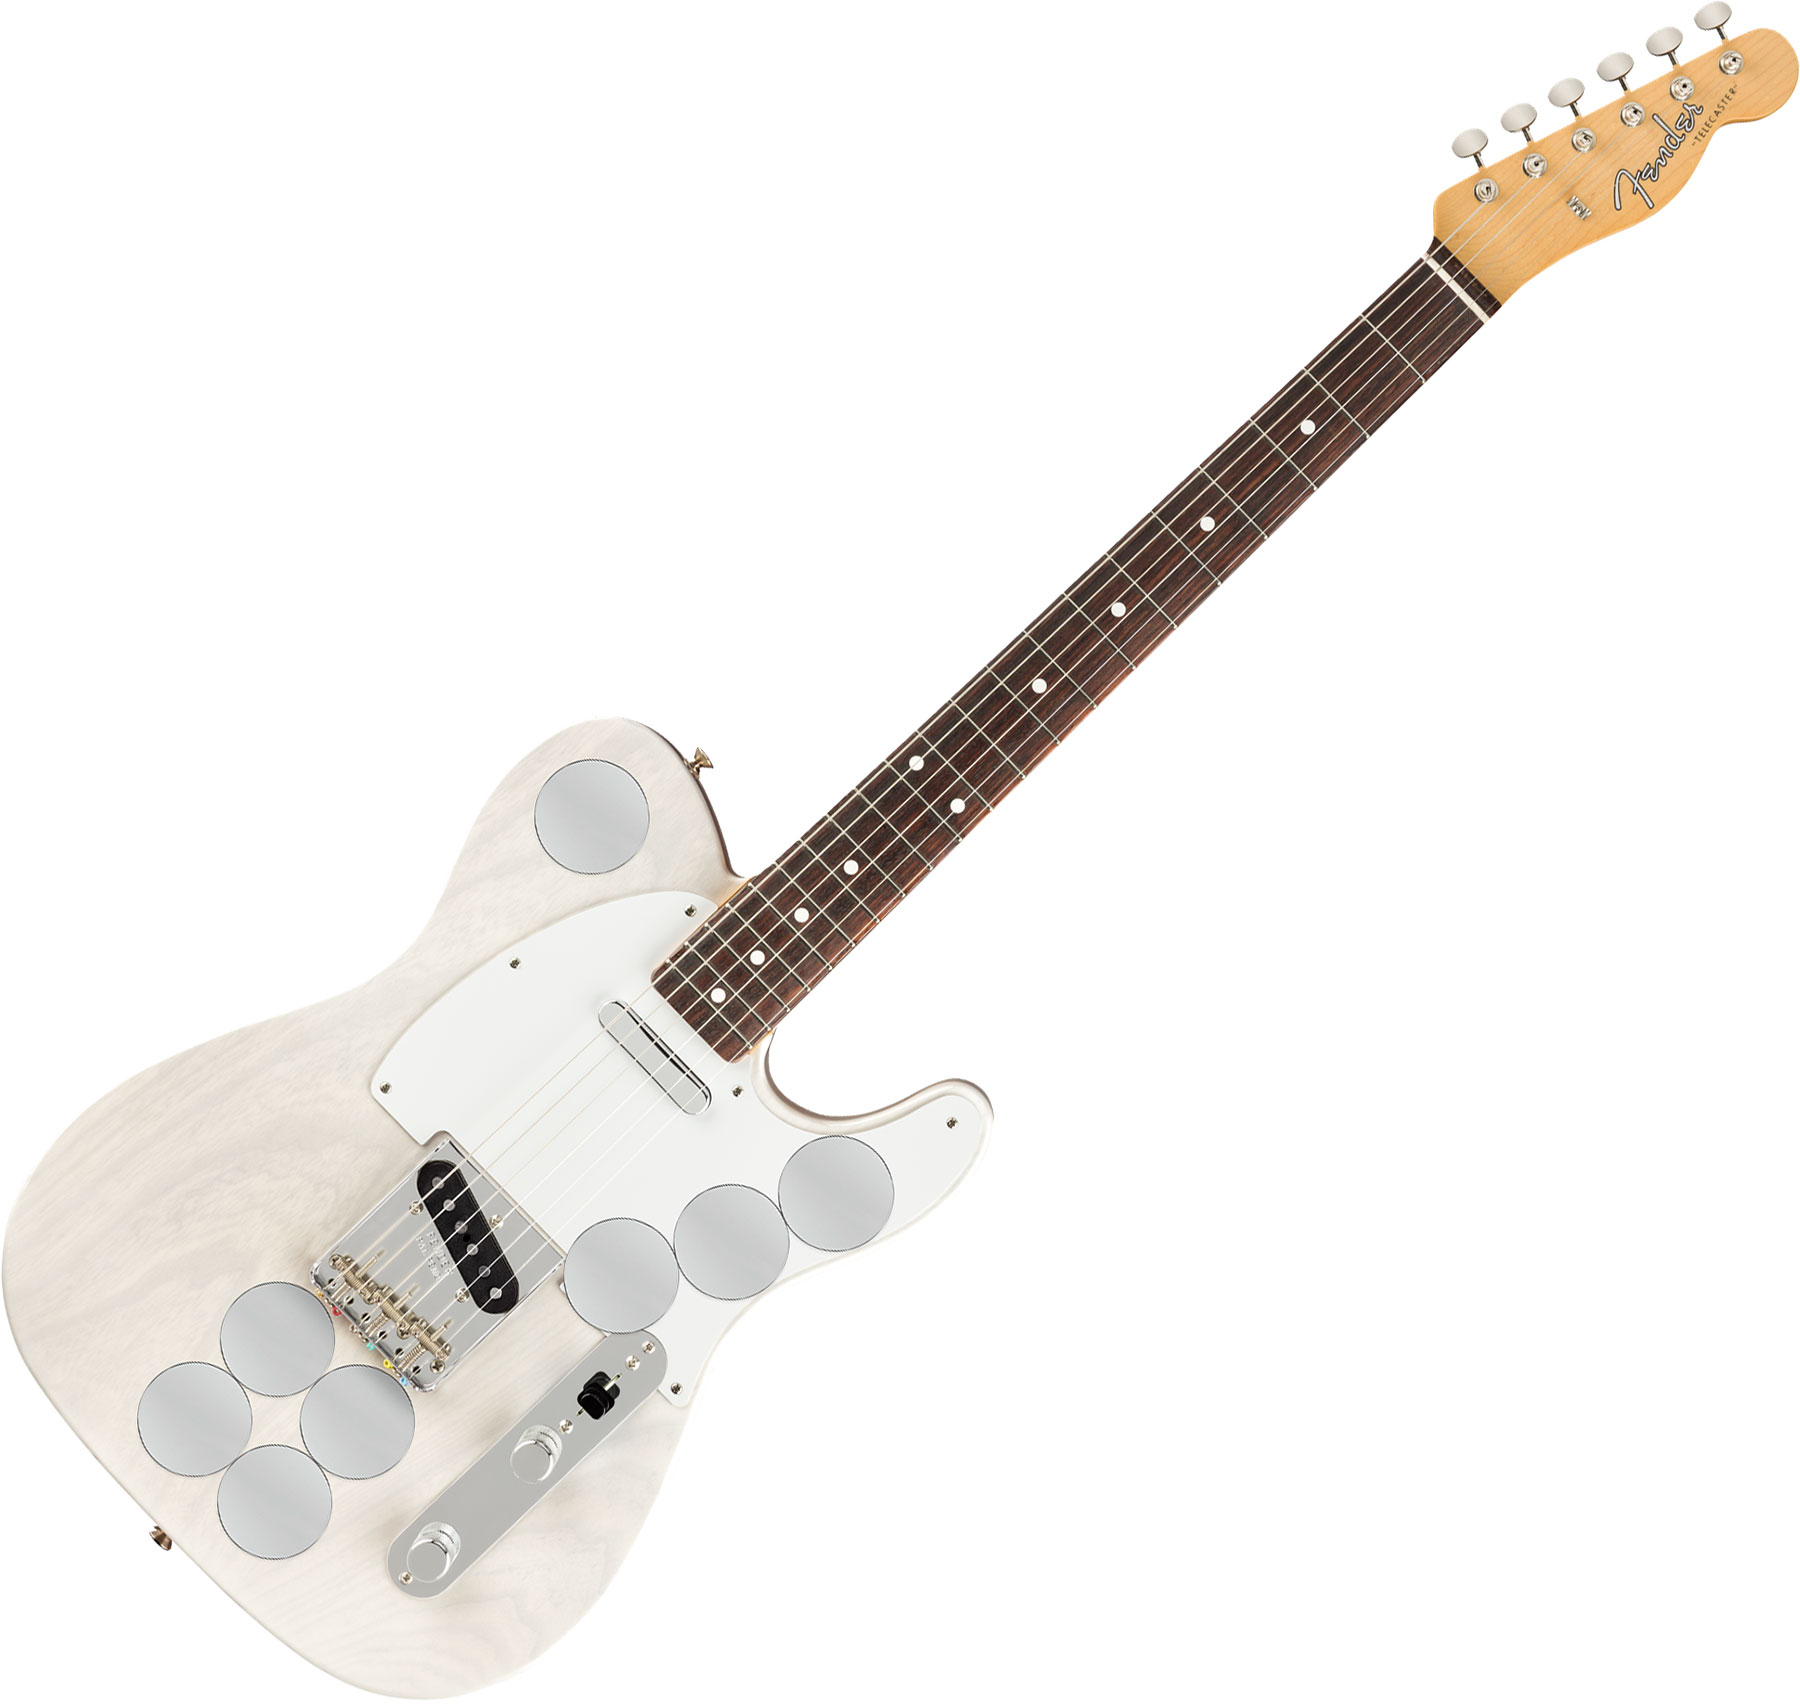 Fender Telecaster Mirror Jimmy Page US RW - white blonde Solid 